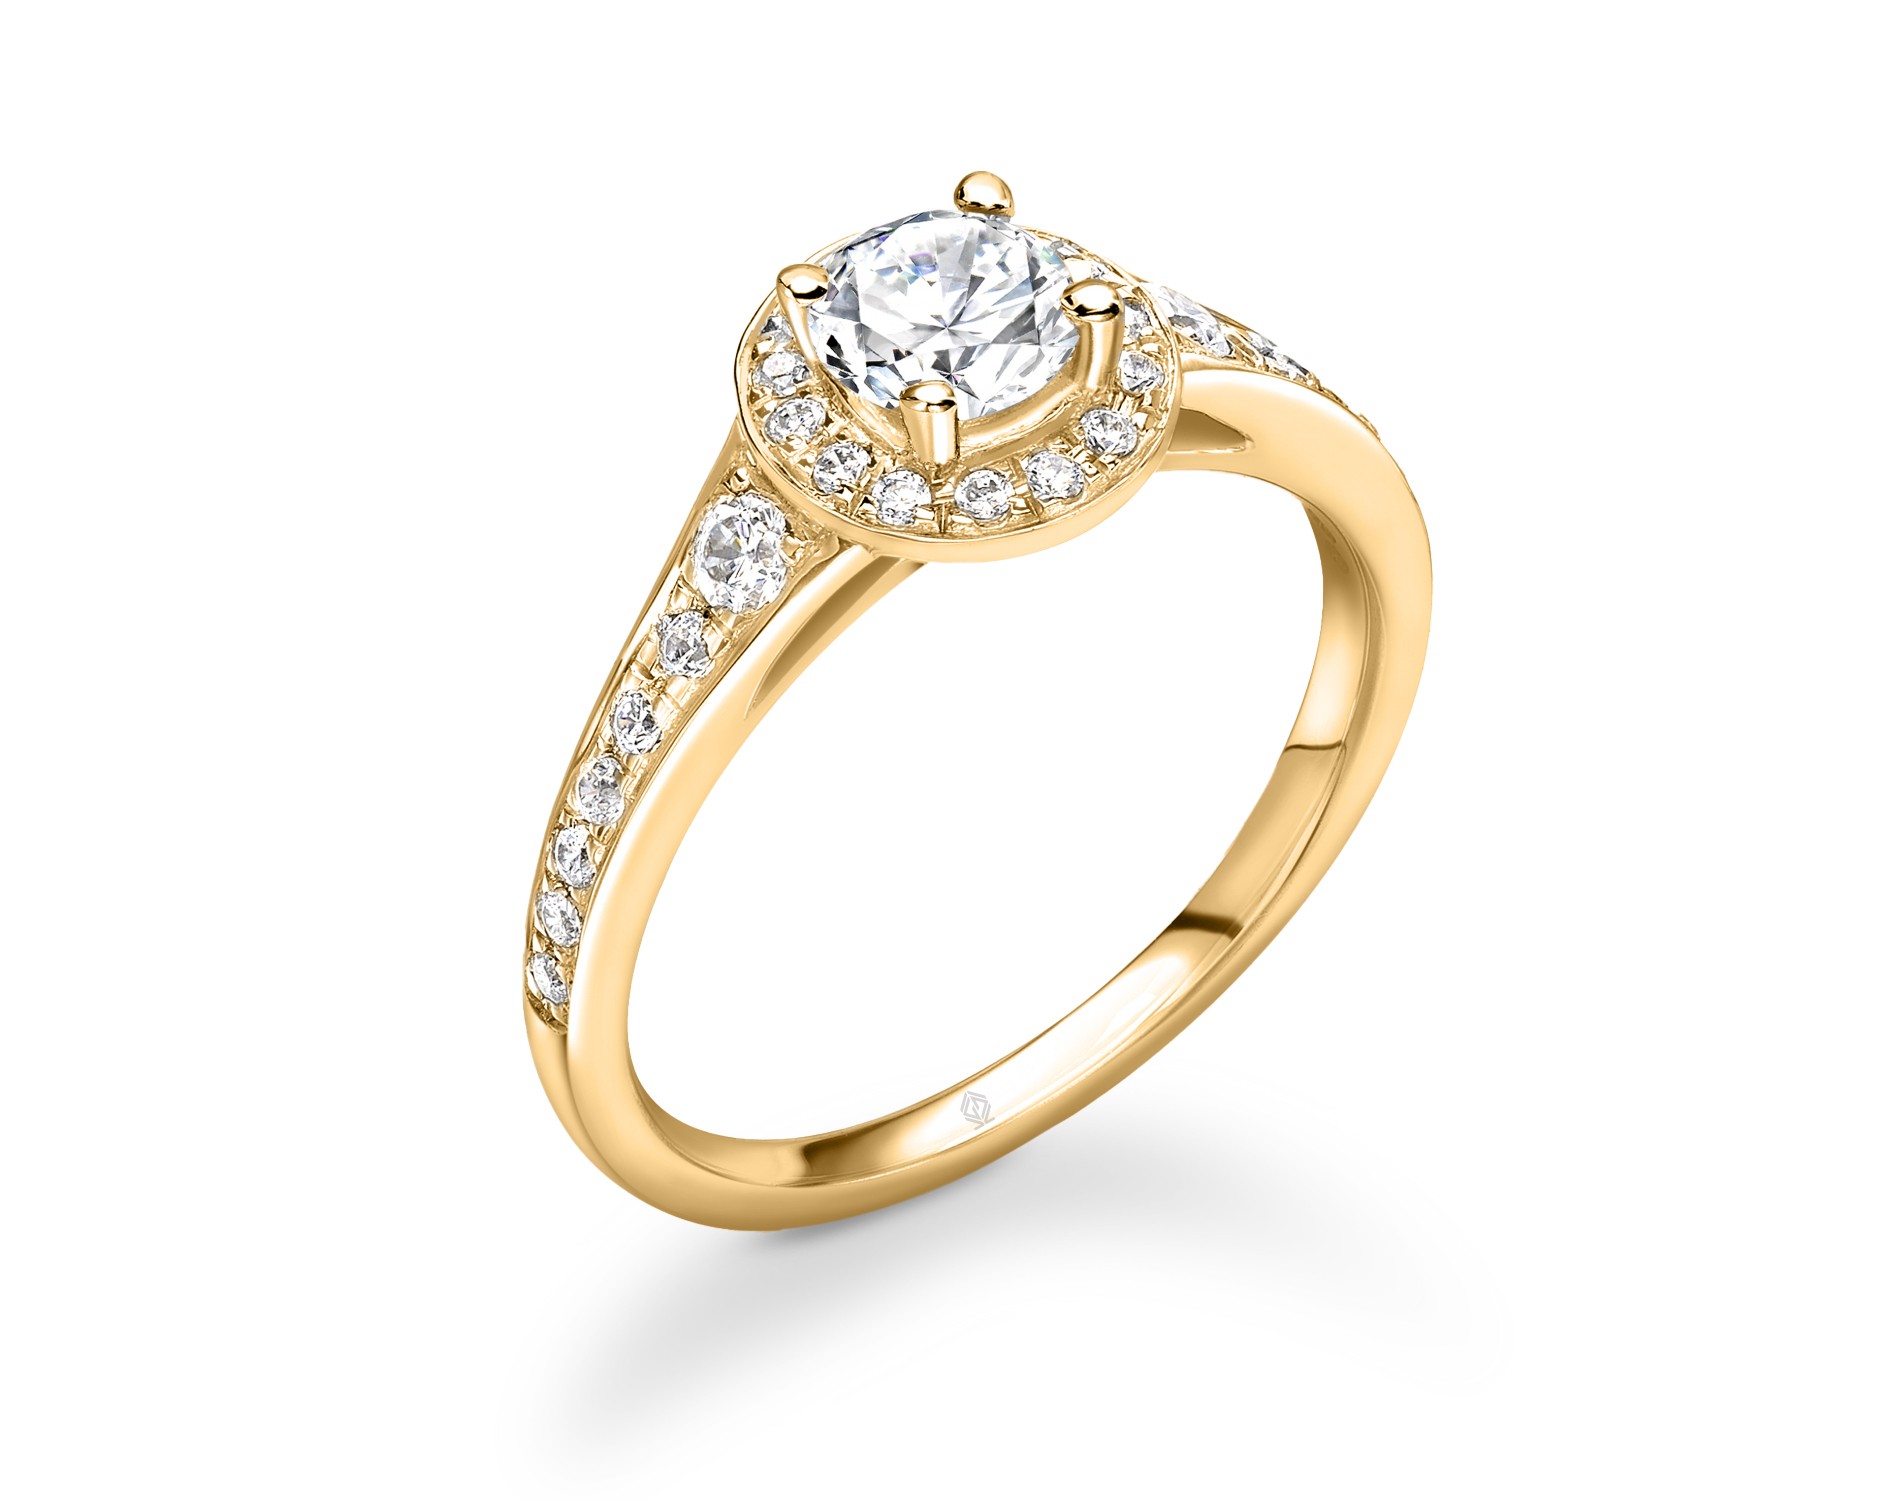 18K YELLOW GOLD ROUND CUT HALO DIAMOND ENGAGEMENT RING WITH SIDE STONES CHANNEL SET